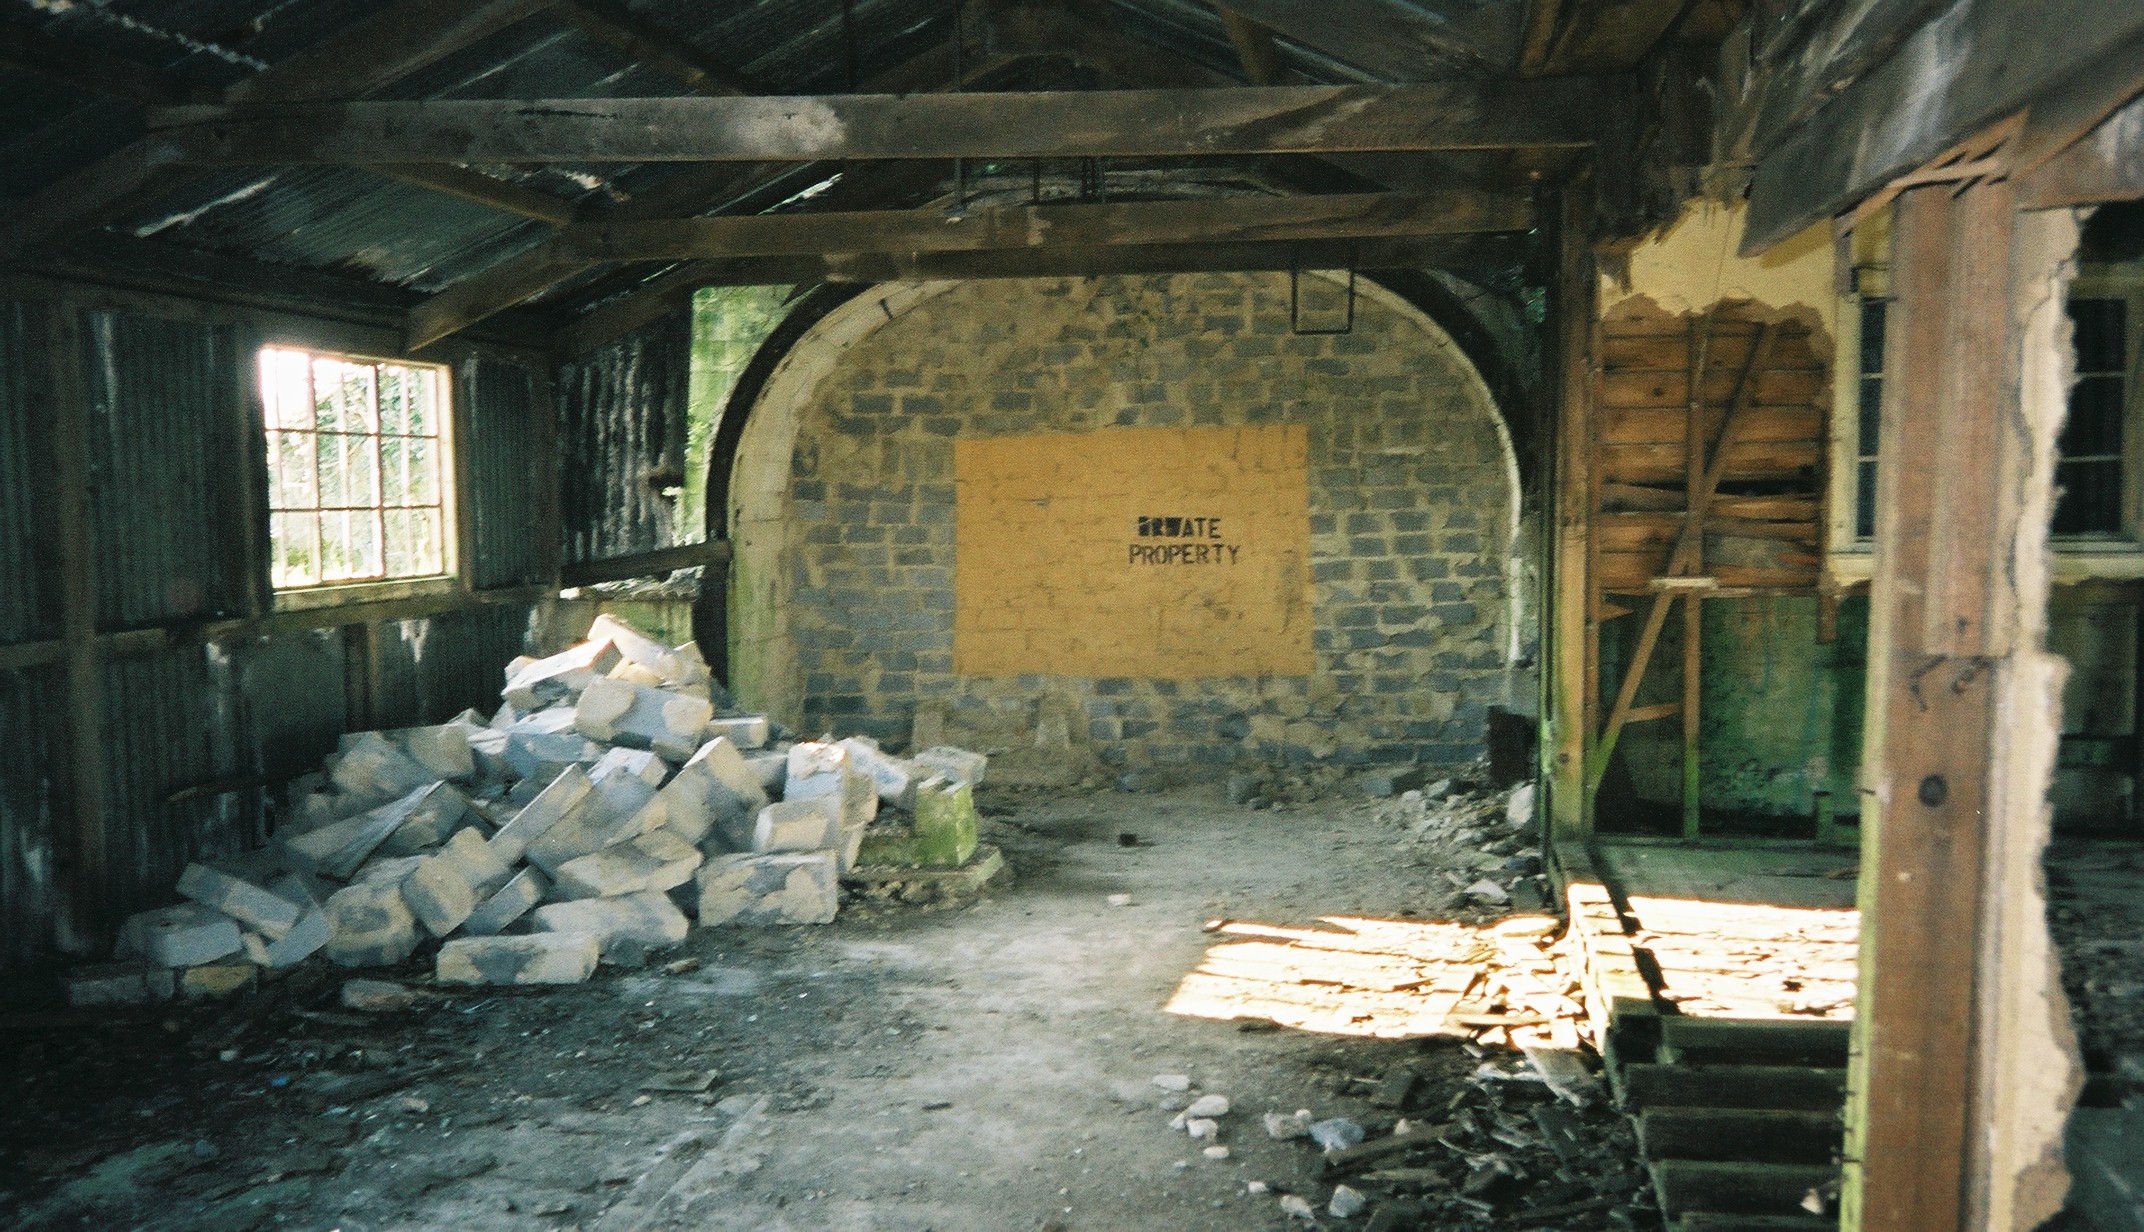 The entrance to District 19 bricked up as part of the storage depot expansion.